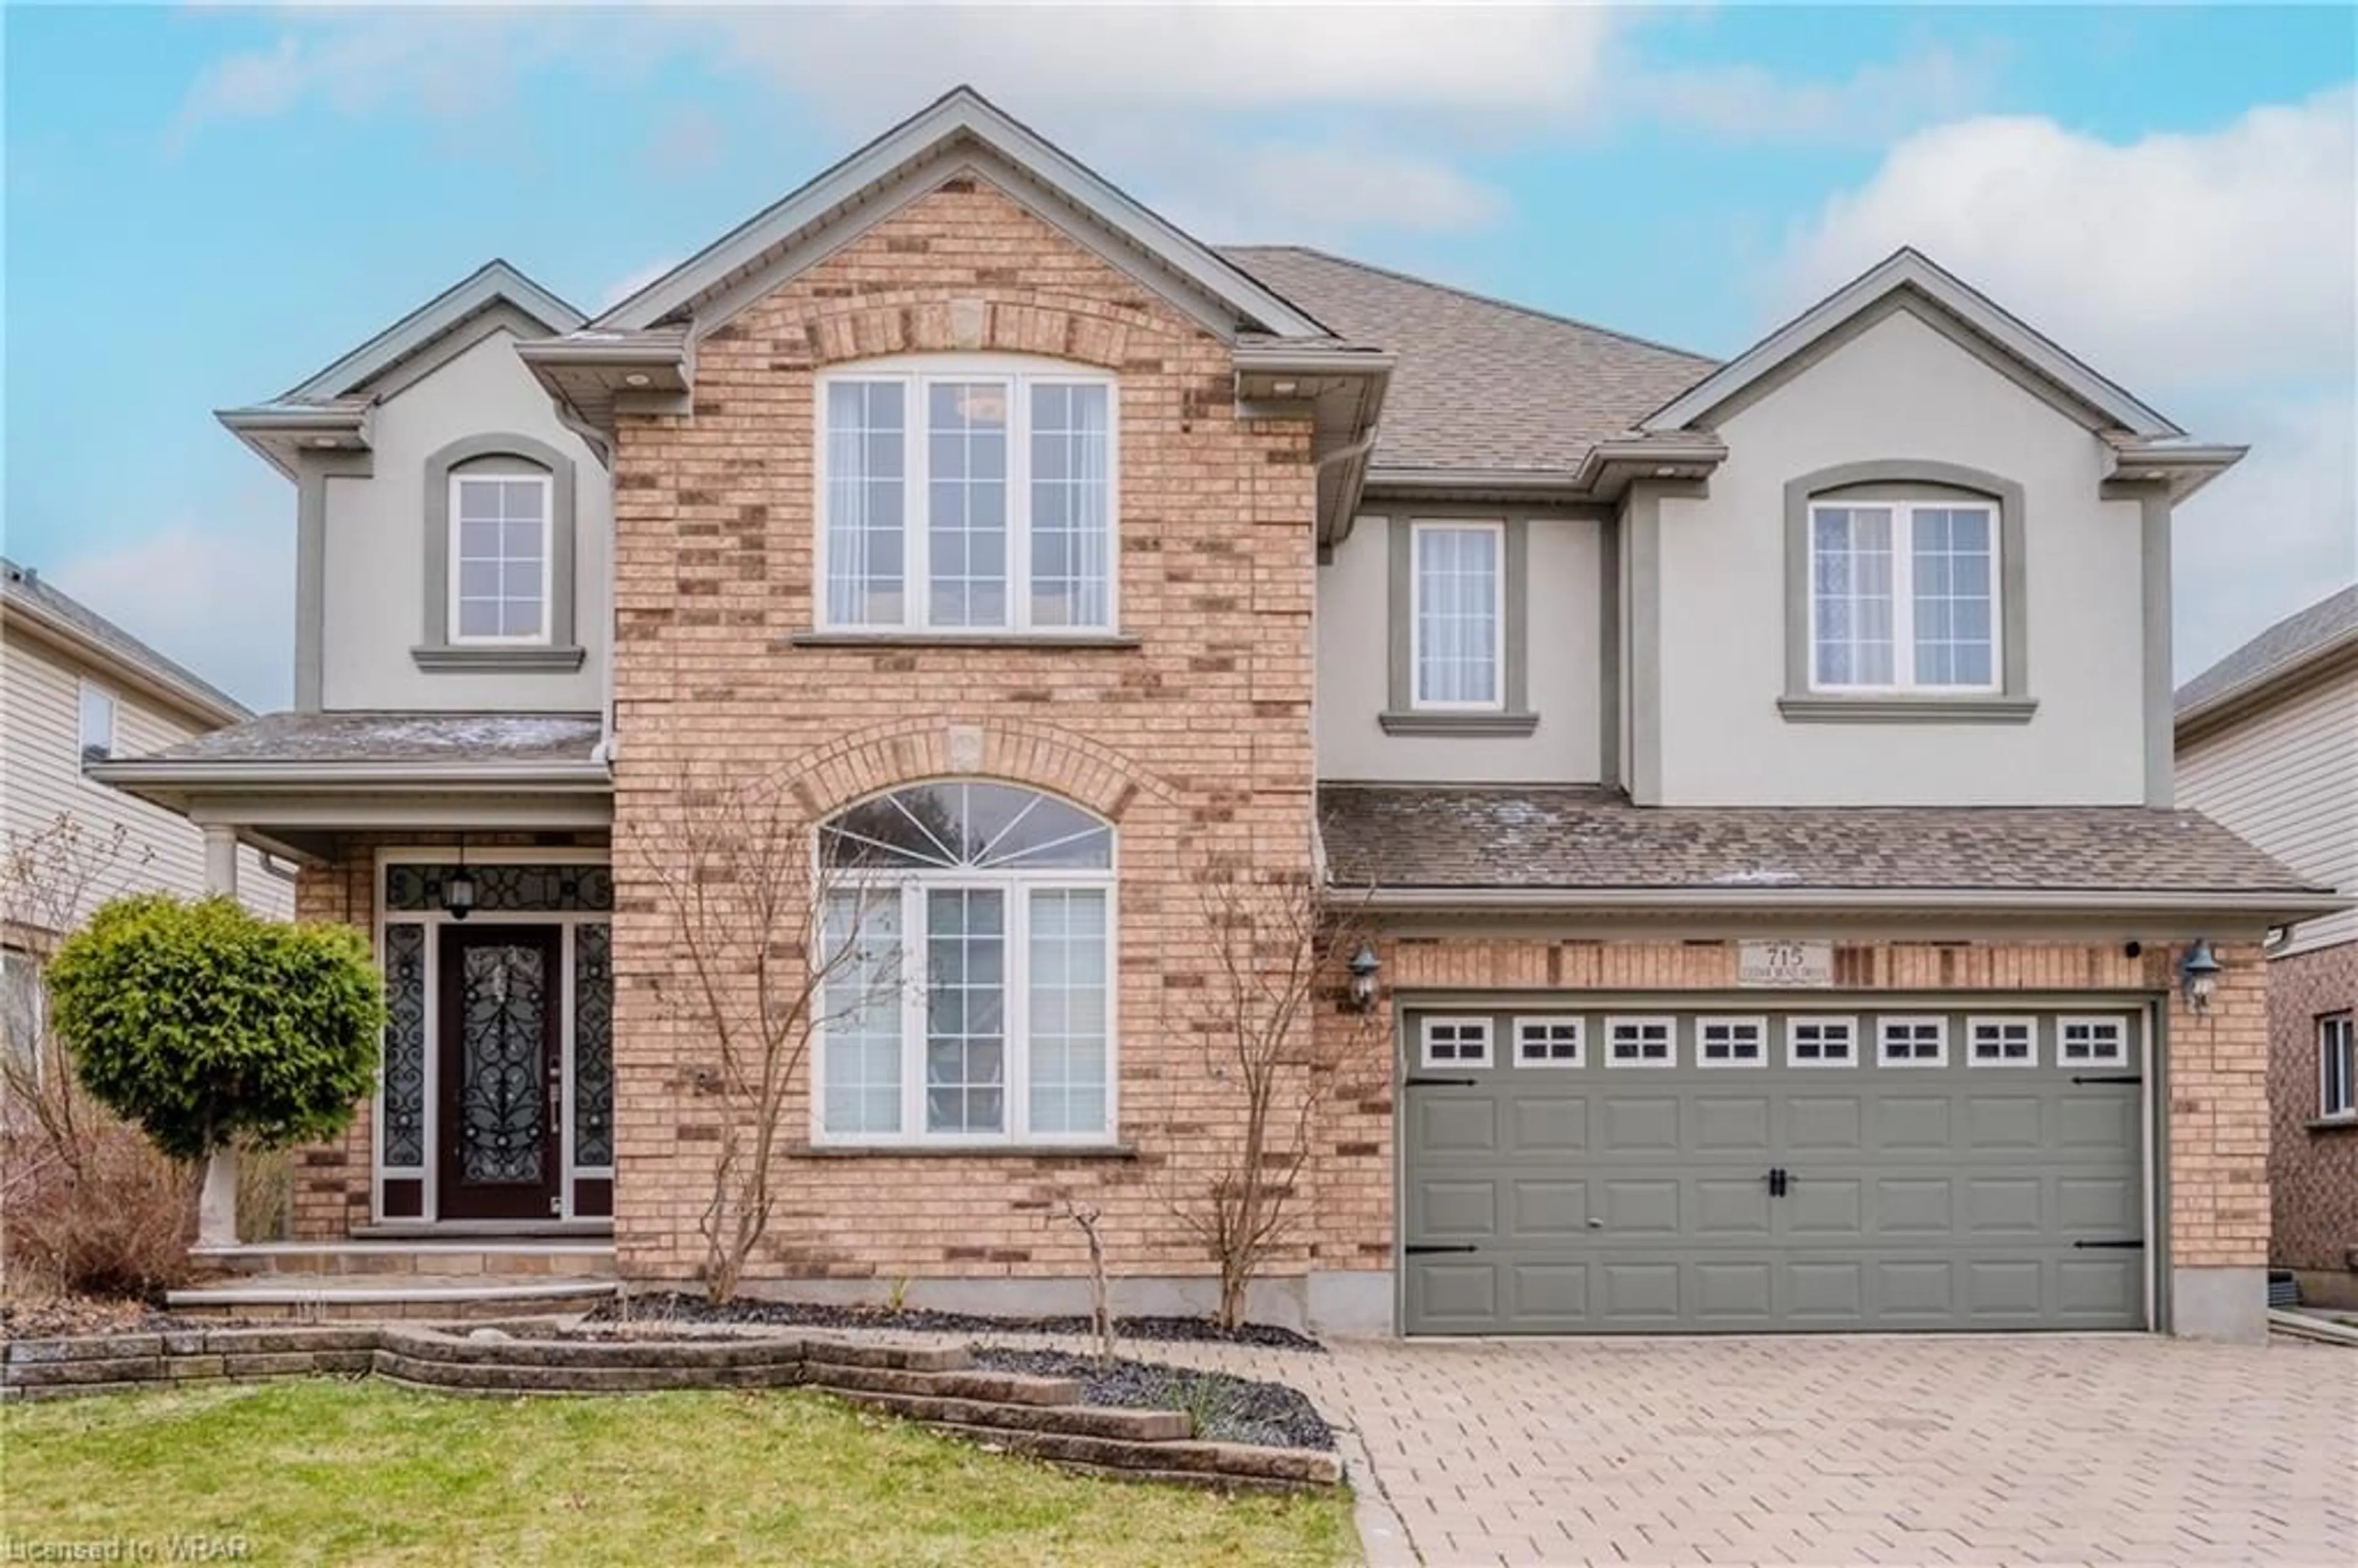 Home with brick exterior material for 715 Cedar Bend Dr, Waterloo Ontario N2V 2R2